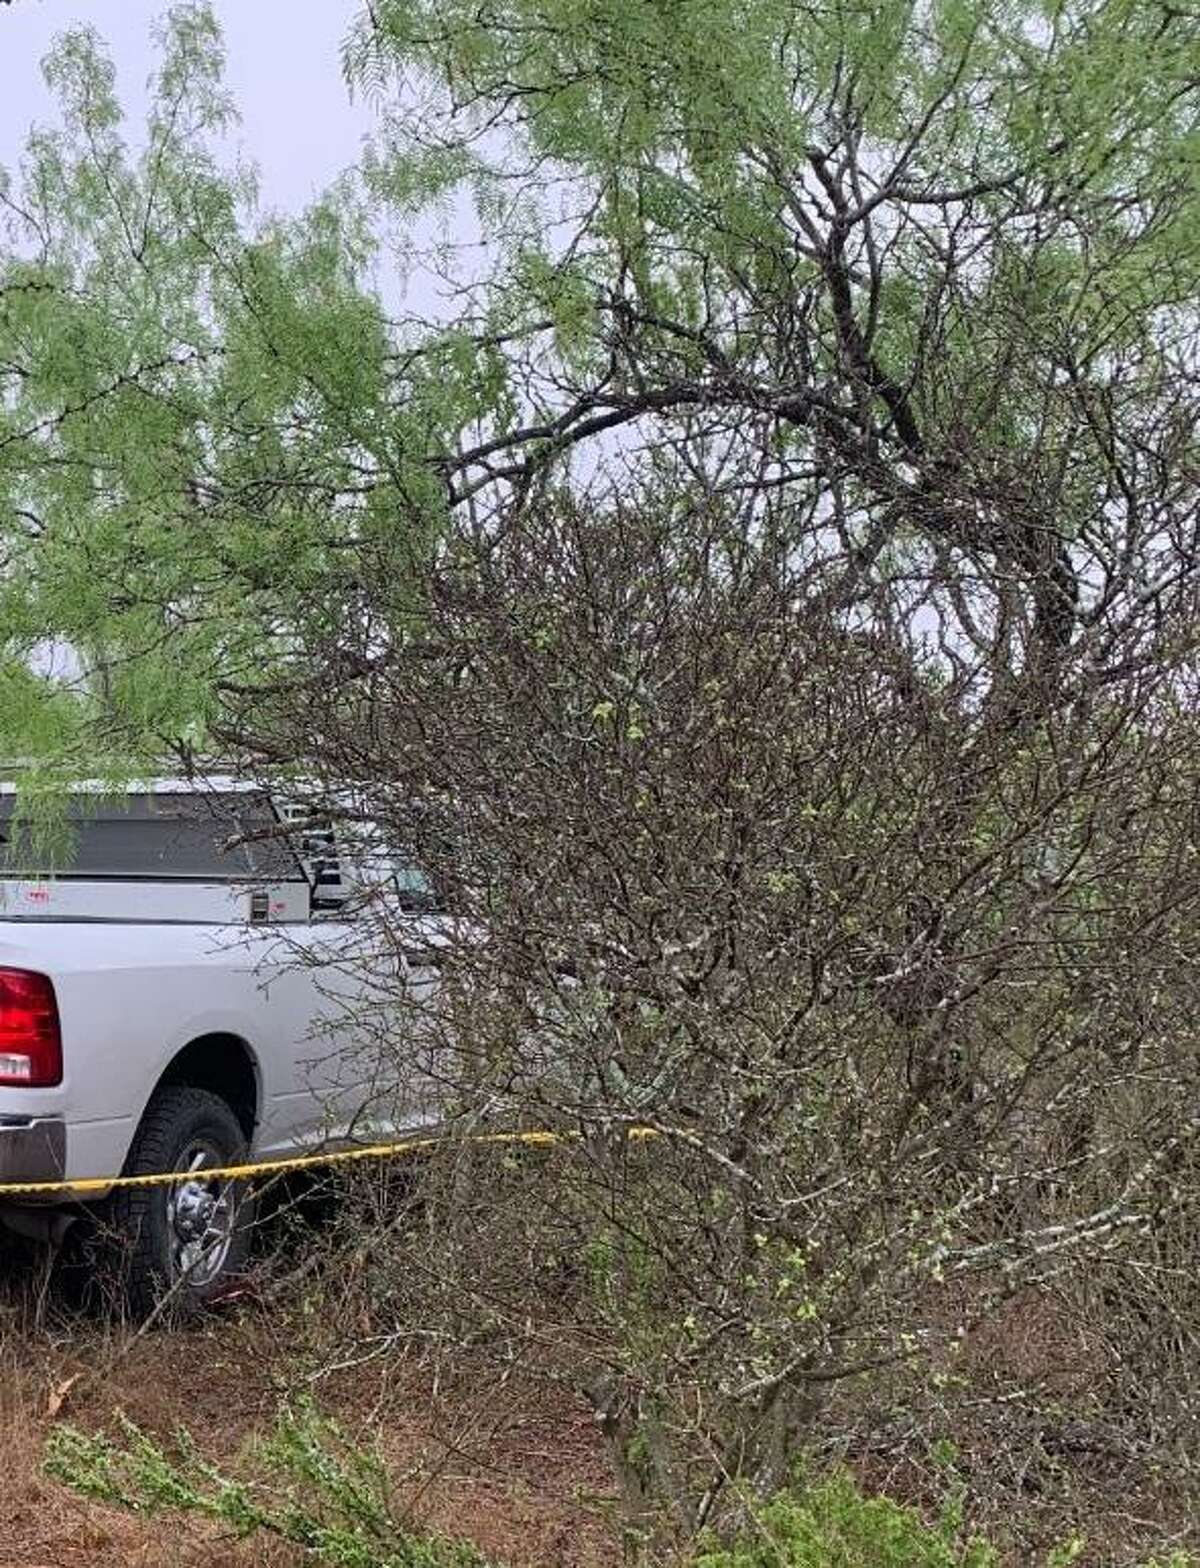 This white Dodge Ram 2500 was involved in a human smuggling attempt where a citizen of Mexico died on April 22 in northern Webb County. Authorities said the vehicle was reported stolen. The driver pleaded guilty on Thursday to an 18-count indictment on human smuggling charges.